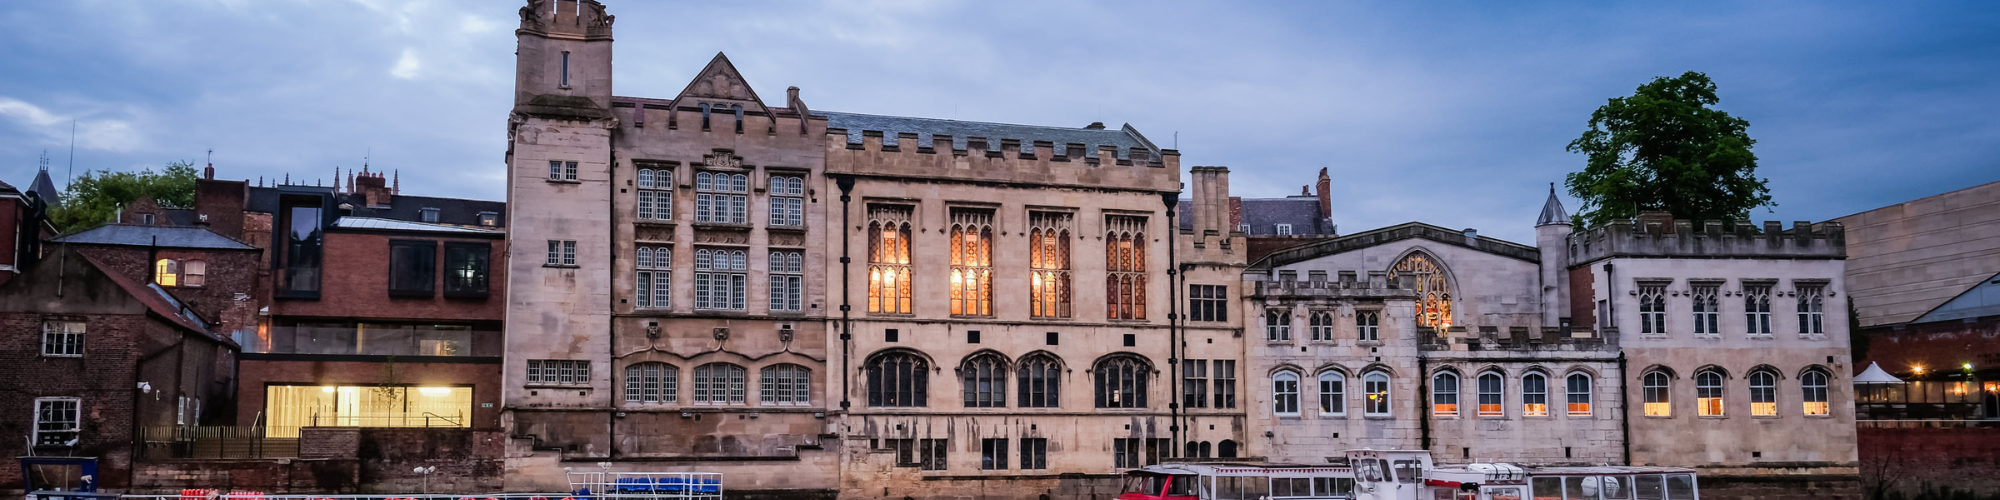 University to take lease of York’s Guildhall in 2021